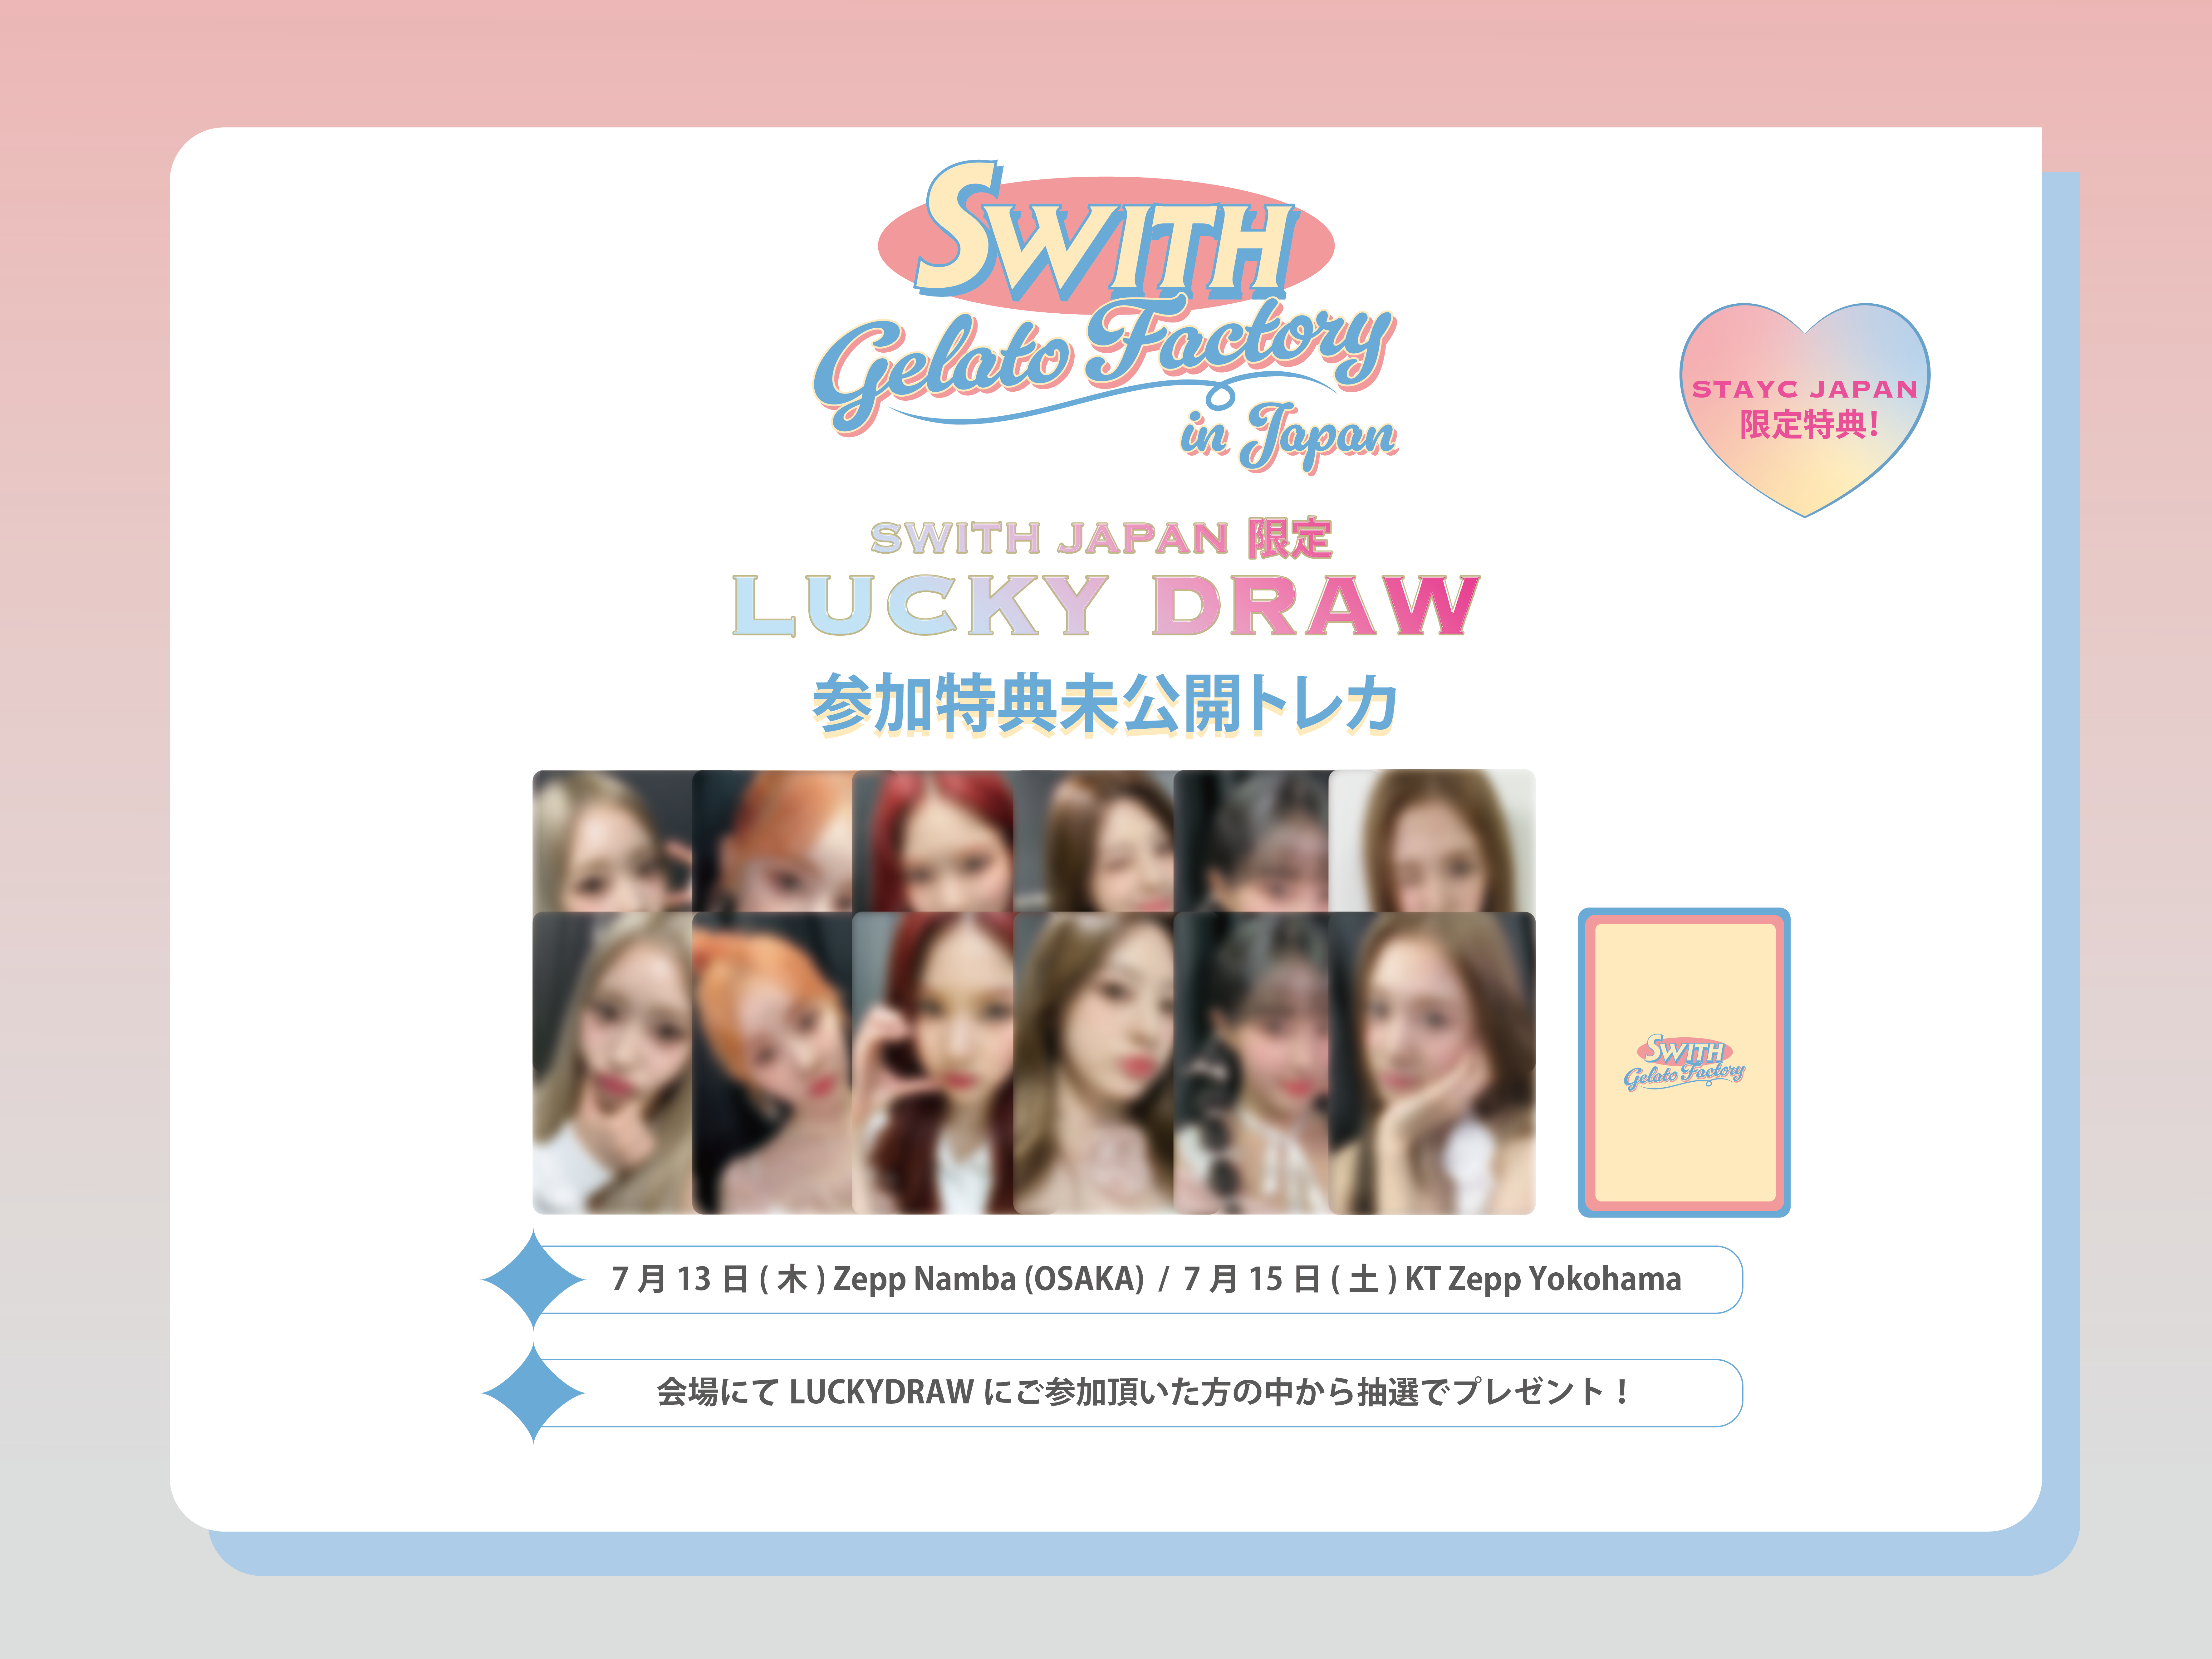 2023 STAYC FANMEETING “SWITH Gelato Factory” in Japan LUCKY DRAW 